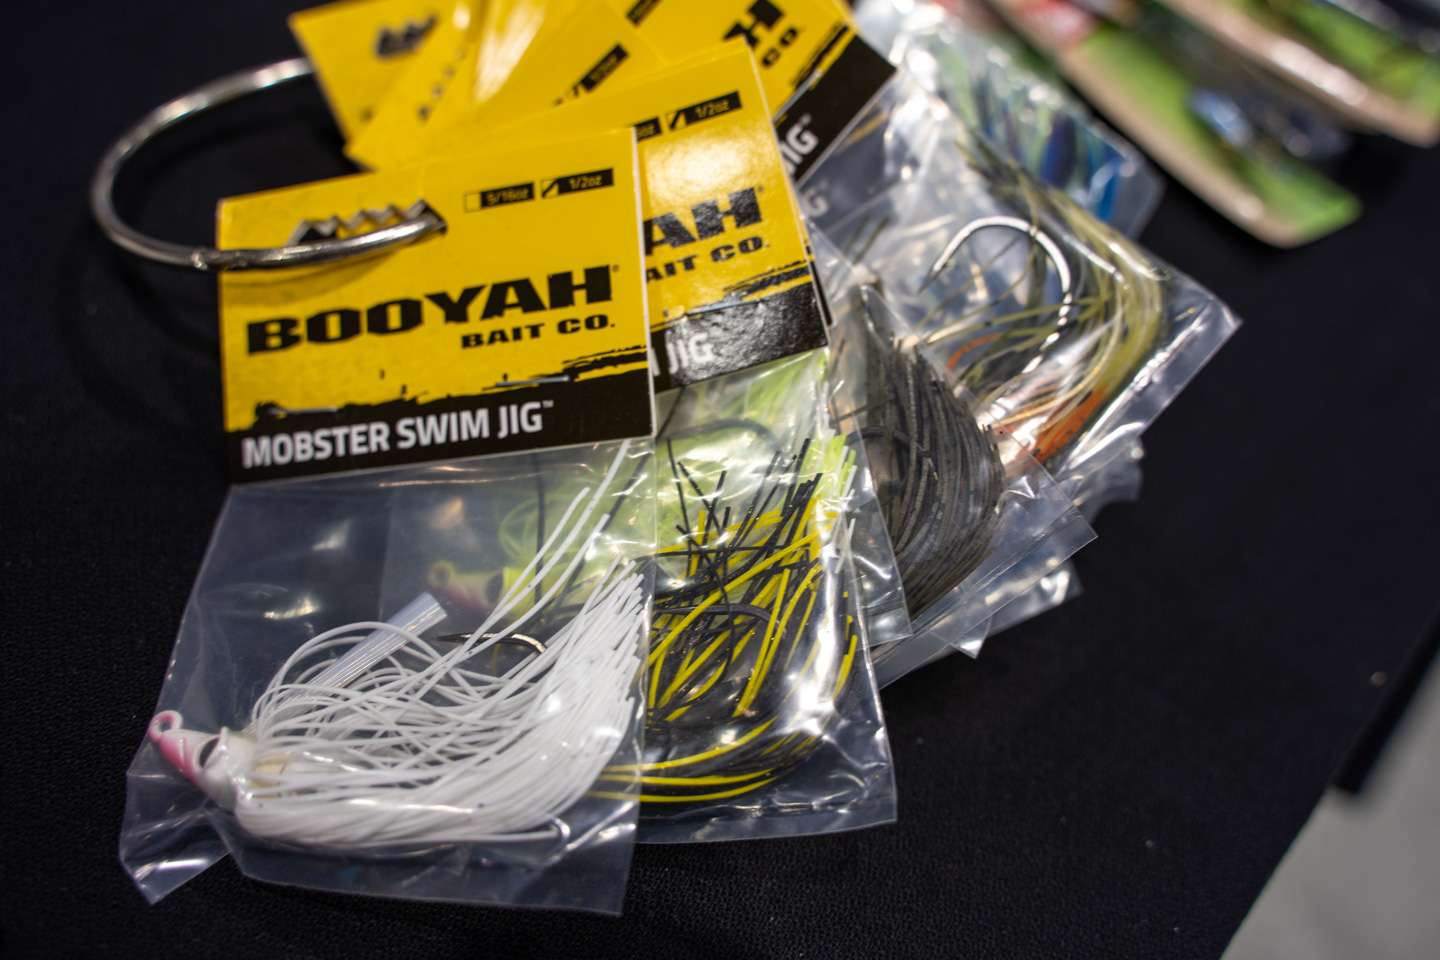 <b>Booyah Mobster Swim Jig</b><br>
After watching Chris Jones nearly win the 2021 Academy Sports + Outdoors Bassmaster Classic presented by Huk on this swim jig, I had to see it in person. 